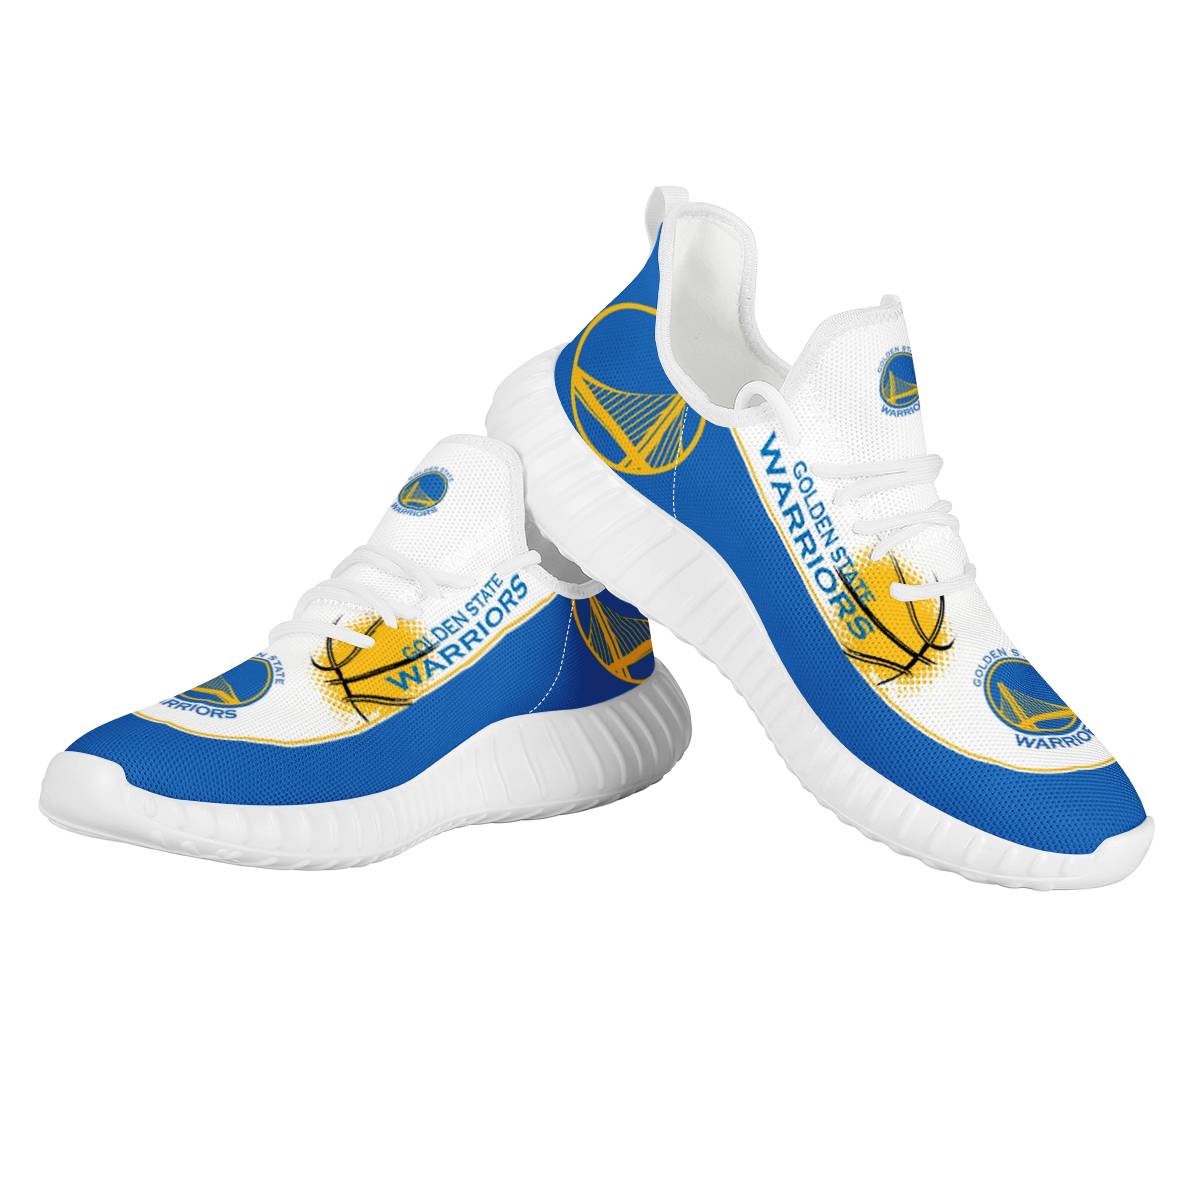 Women's Golden State Warriors Mesh Knit Sneakers/Shoes 002